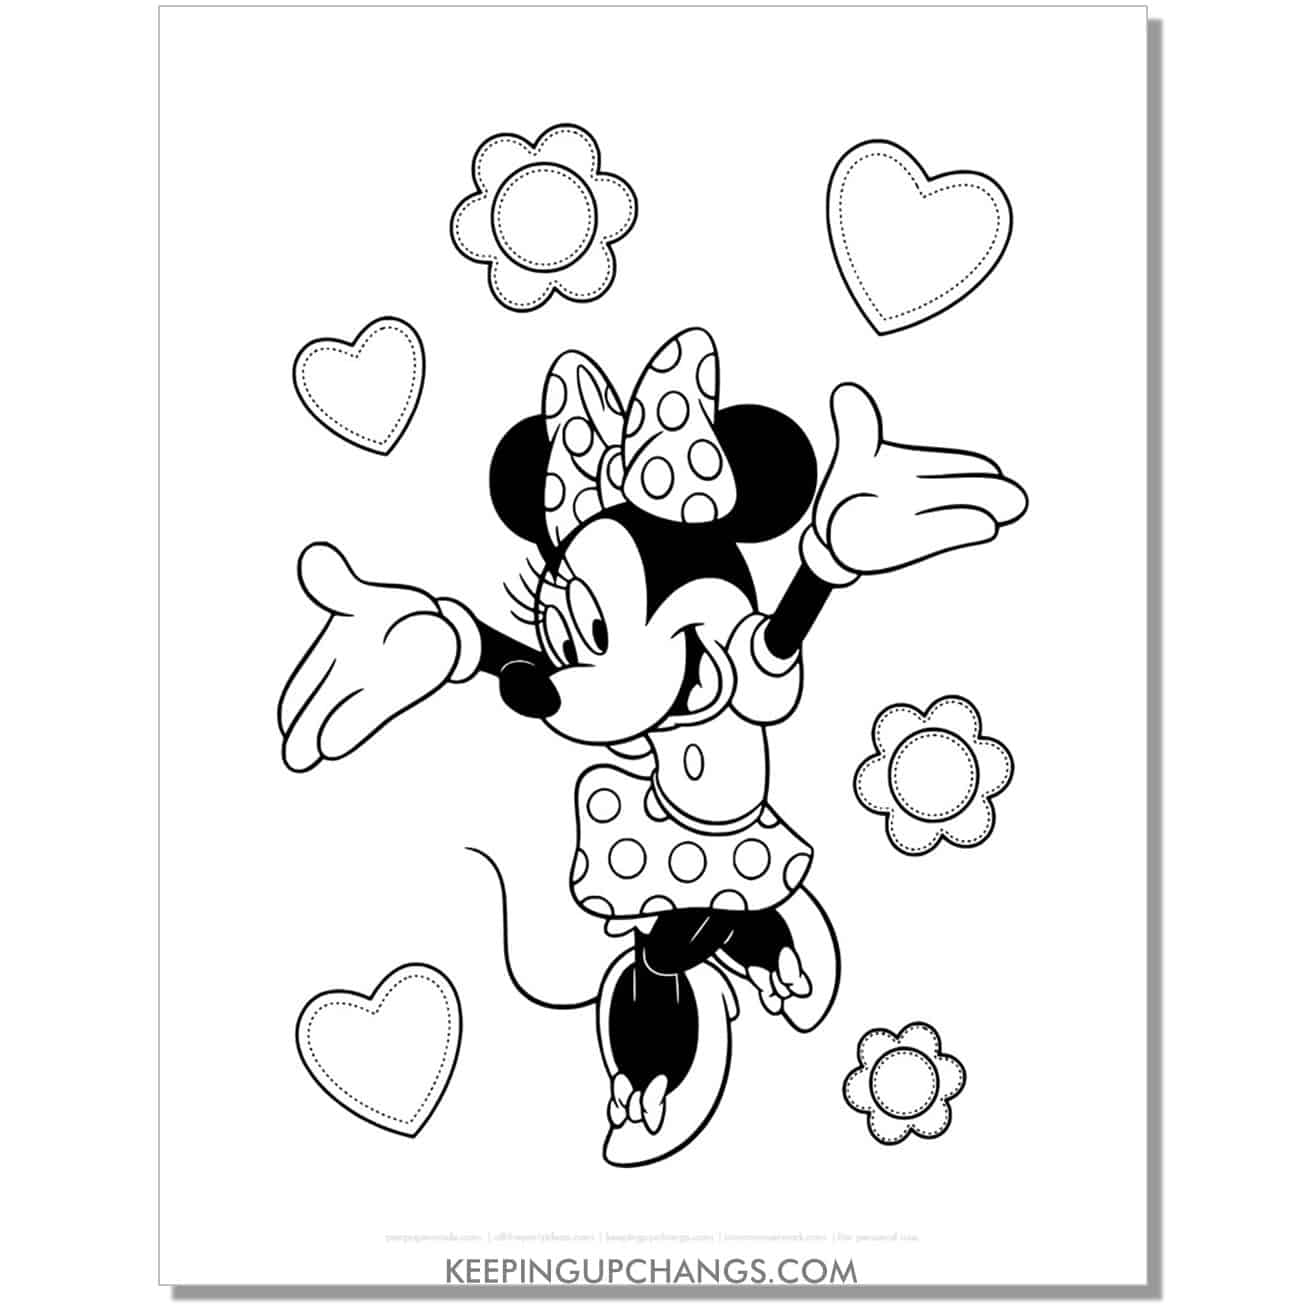 free valentine's minnie mouse with hearts, flowers coloring page, sheet.